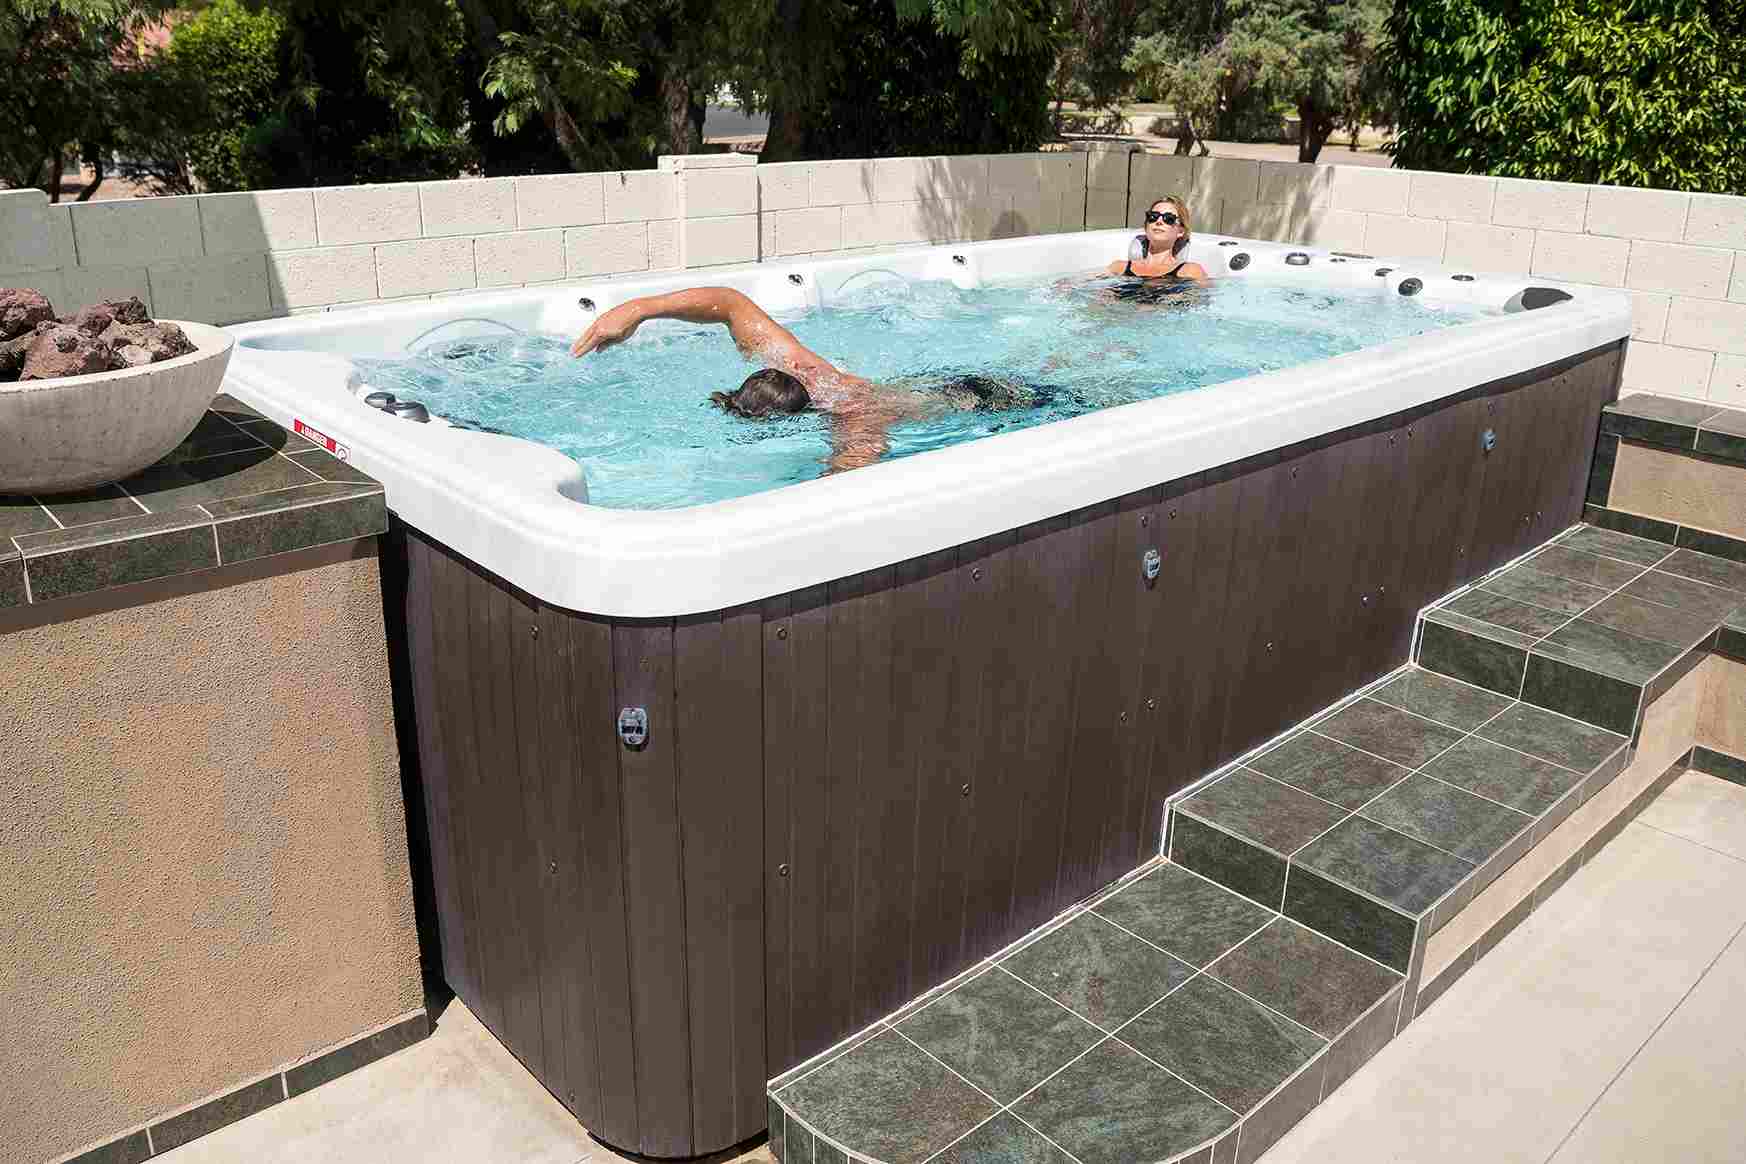 Exercise at Home in a Swim Spa